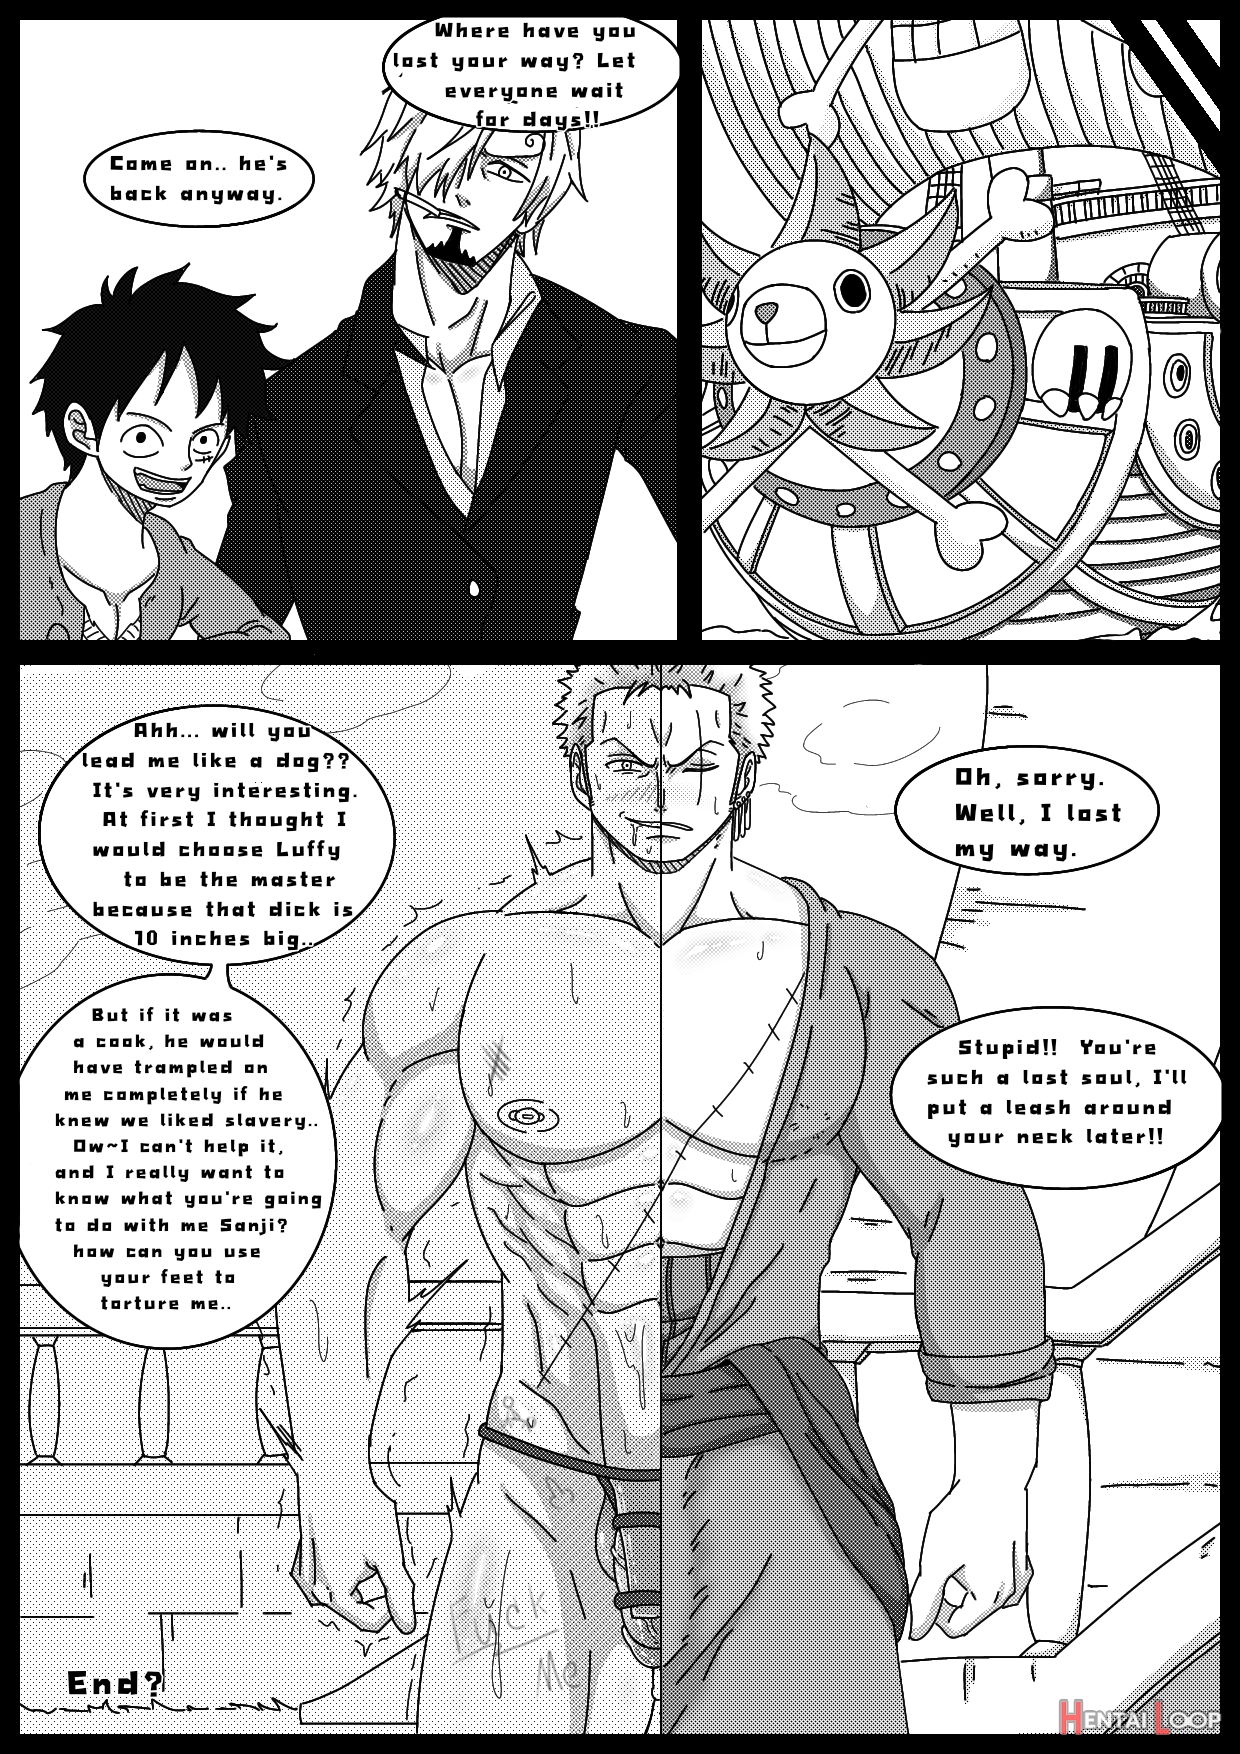 Zoro Slave Of The Celestial Dragons page 21